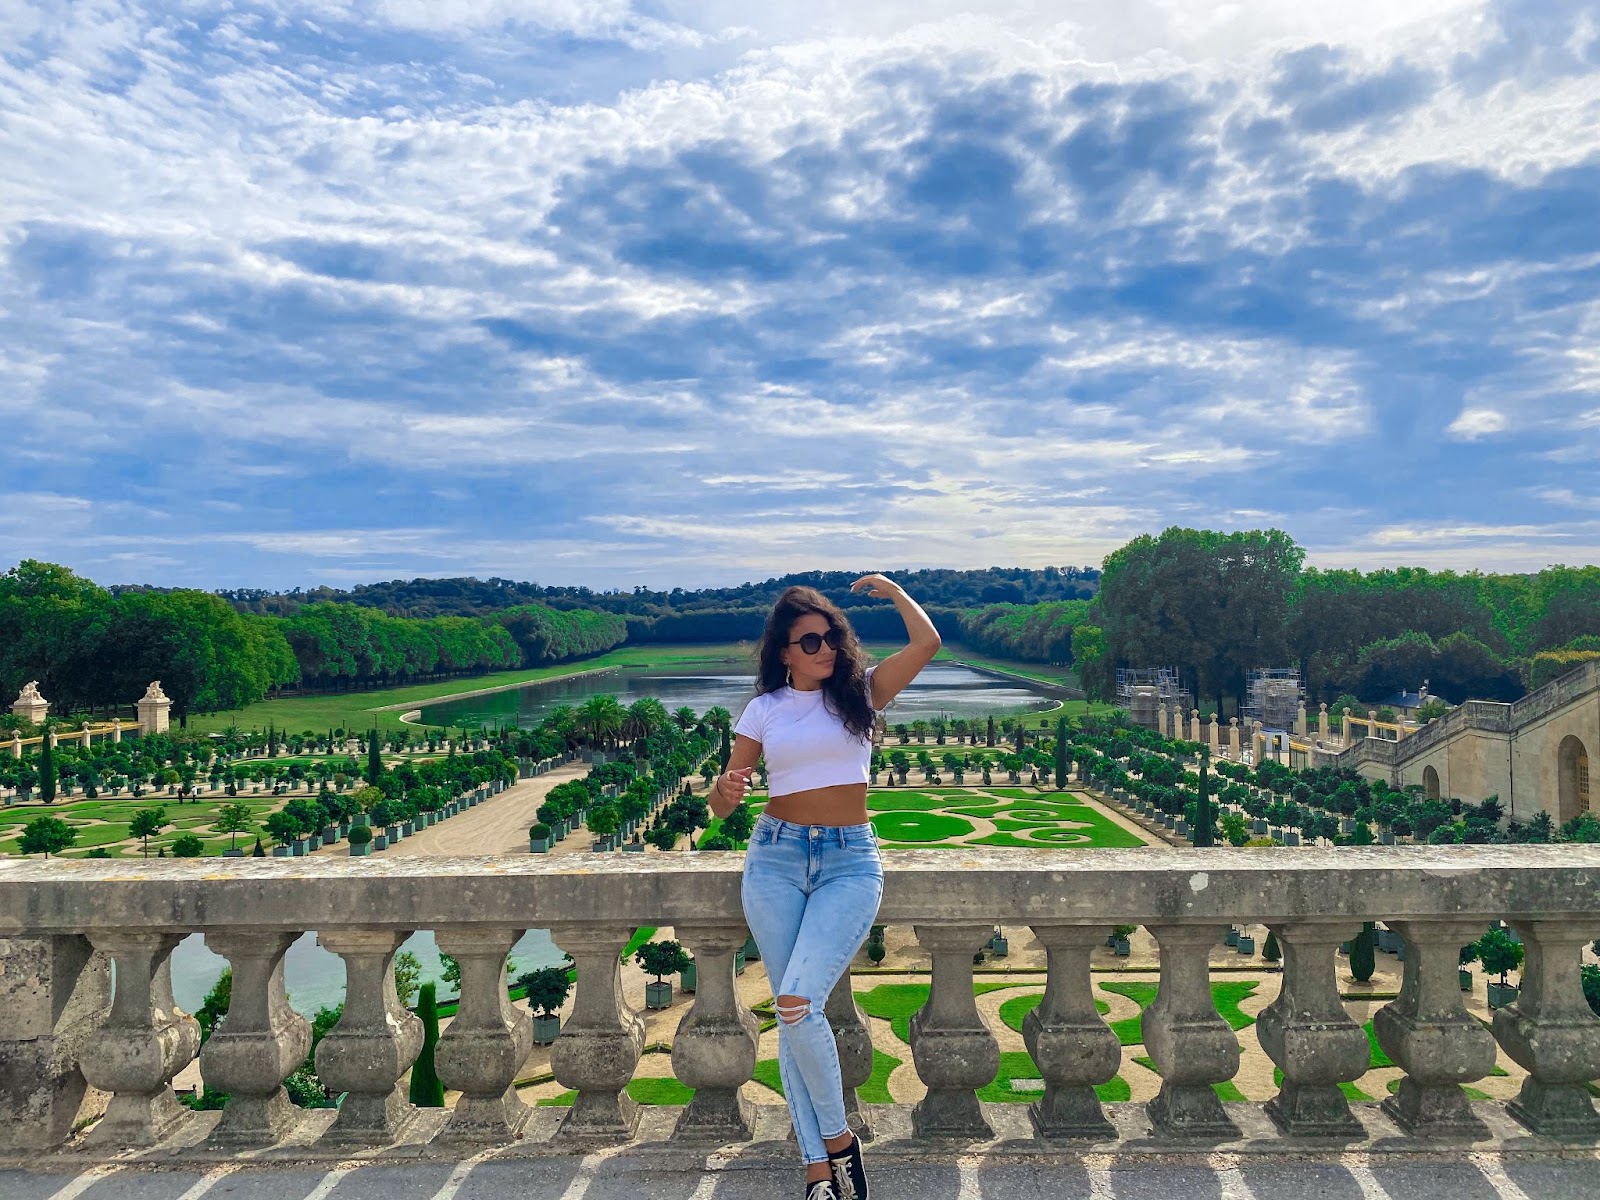 Instagram Influencer Kristel Andraos of Kikiandraos on Making Better Content & Landing Brand Deals